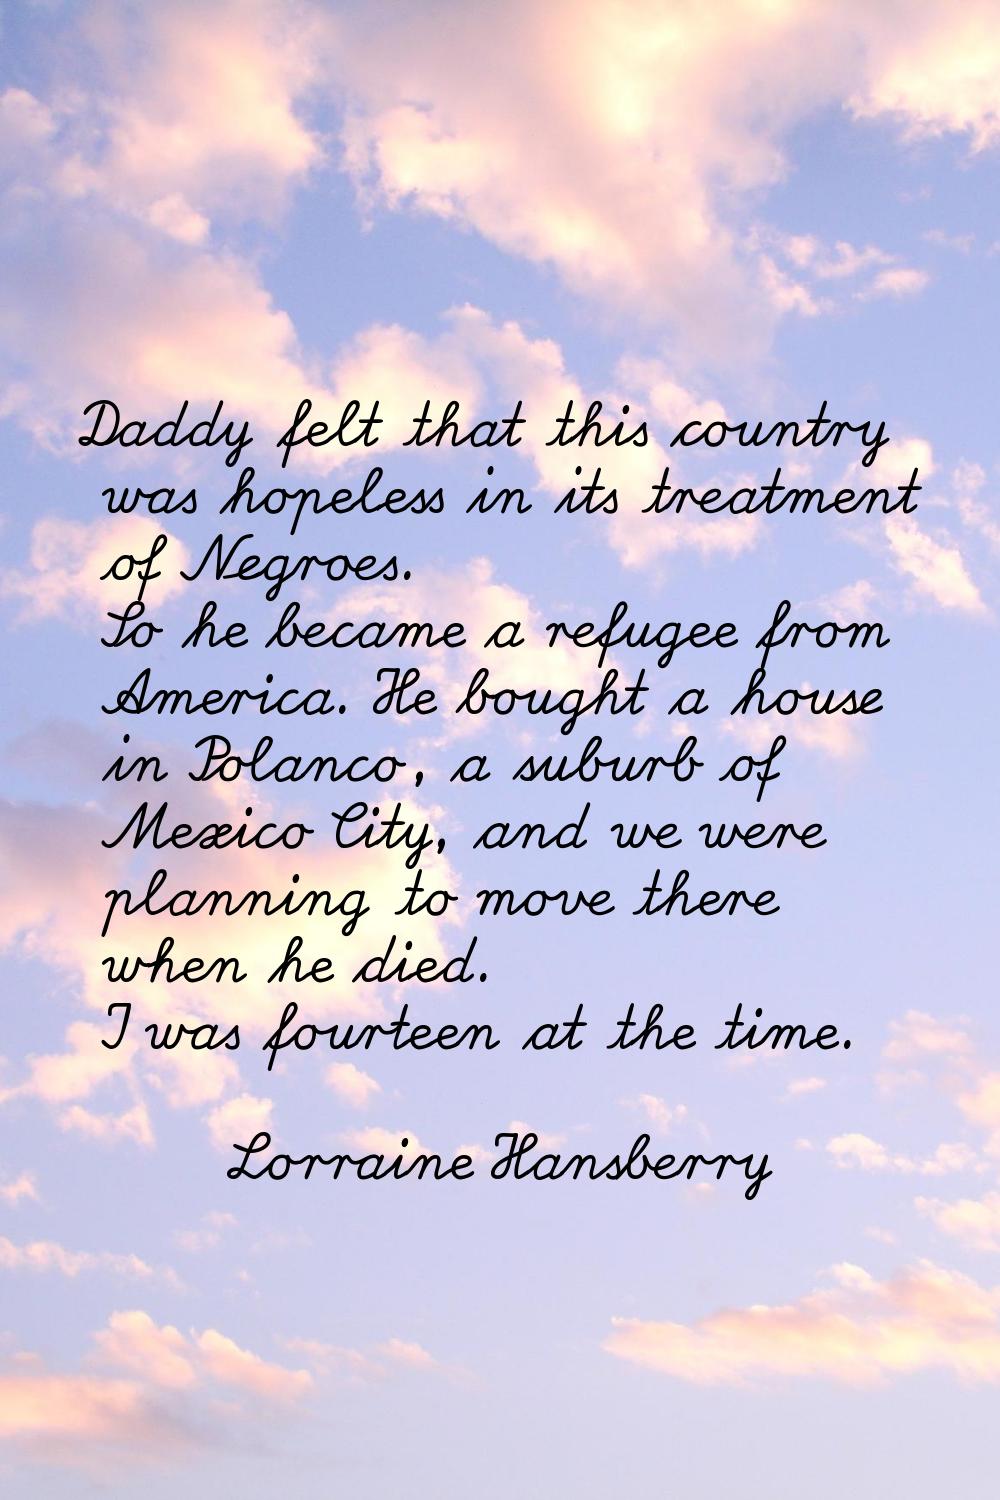 Daddy felt that this country was hopeless in its treatment of Negroes. So he became a refugee from 